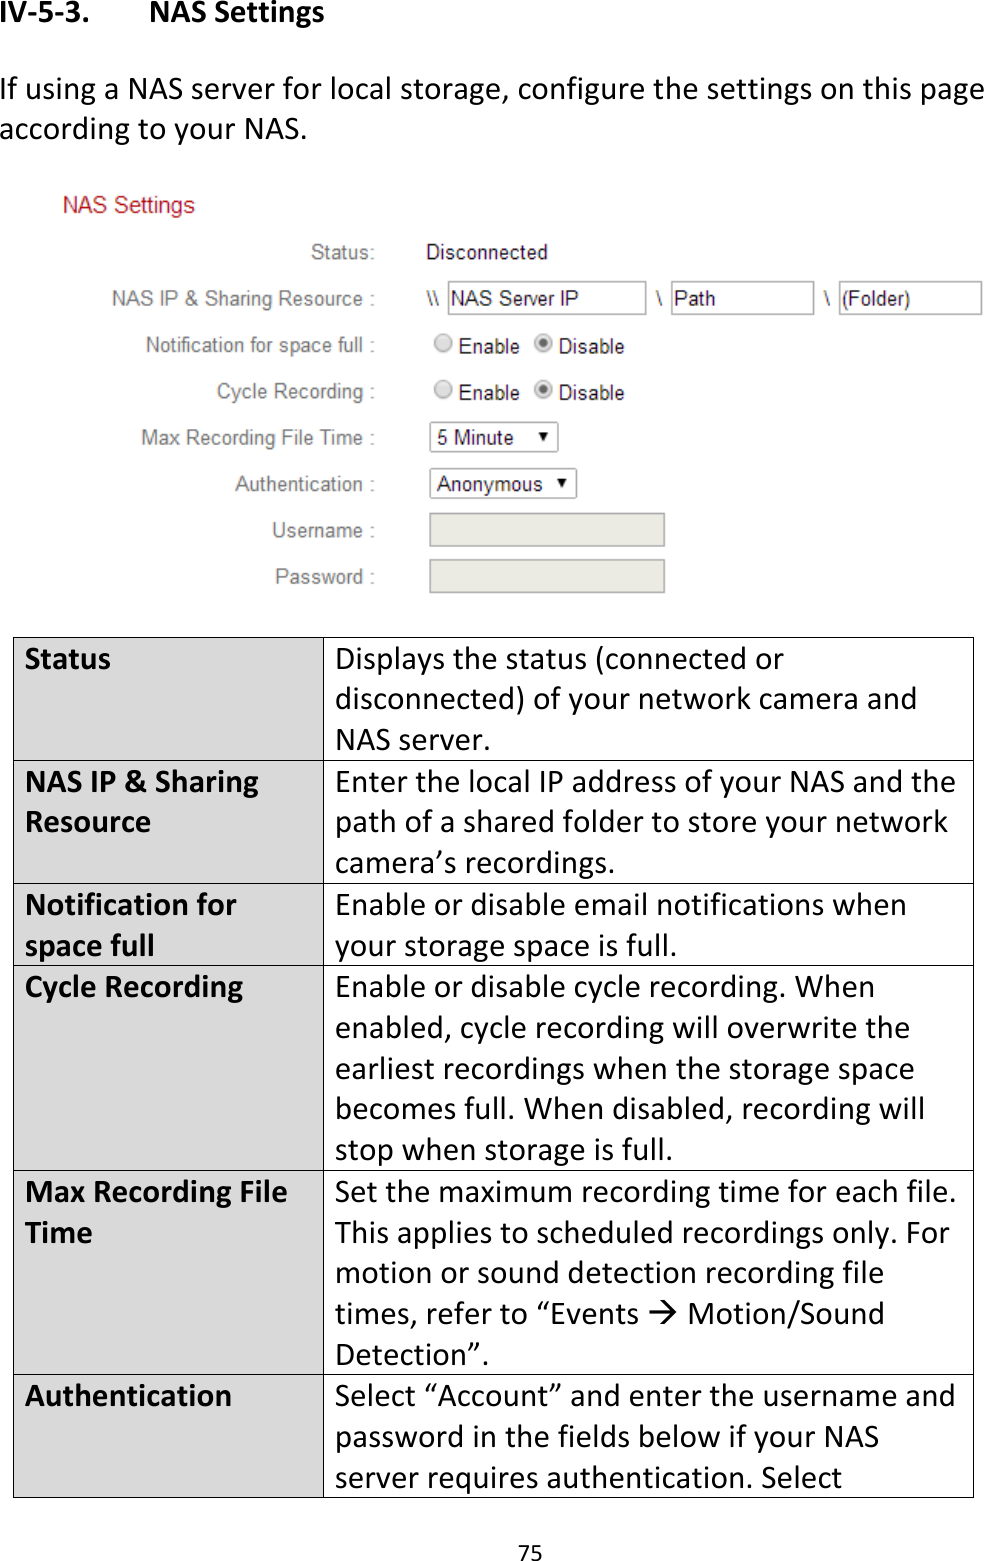 75  IV-5-3.   NAS Settings  If using a NAS server for local storage, configure the settings on this page according to your NAS.    Status Displays the status (connected or disconnected) of your network camera and NAS server. NAS IP &amp; Sharing Resource Enter the local IP address of your NAS and the path of a shared folder to store your network camera’s recordings. Notification for space full Enable or disable email notifications when your storage space is full. Cycle Recording Enable or disable cycle recording. When enabled, cycle recording will overwrite the earliest recordings when the storage space becomes full. When disabled, recording will stop when storage is full. Max Recording File Time Set the maximum recording time for each file. This applies to scheduled recordings only. For motion or sound detection recording file times, refer to “Events  Motion/Sound Detection”.  Authentication Select “Account” and enter the username and password in the fields below if your NAS server requires authentication. Select 